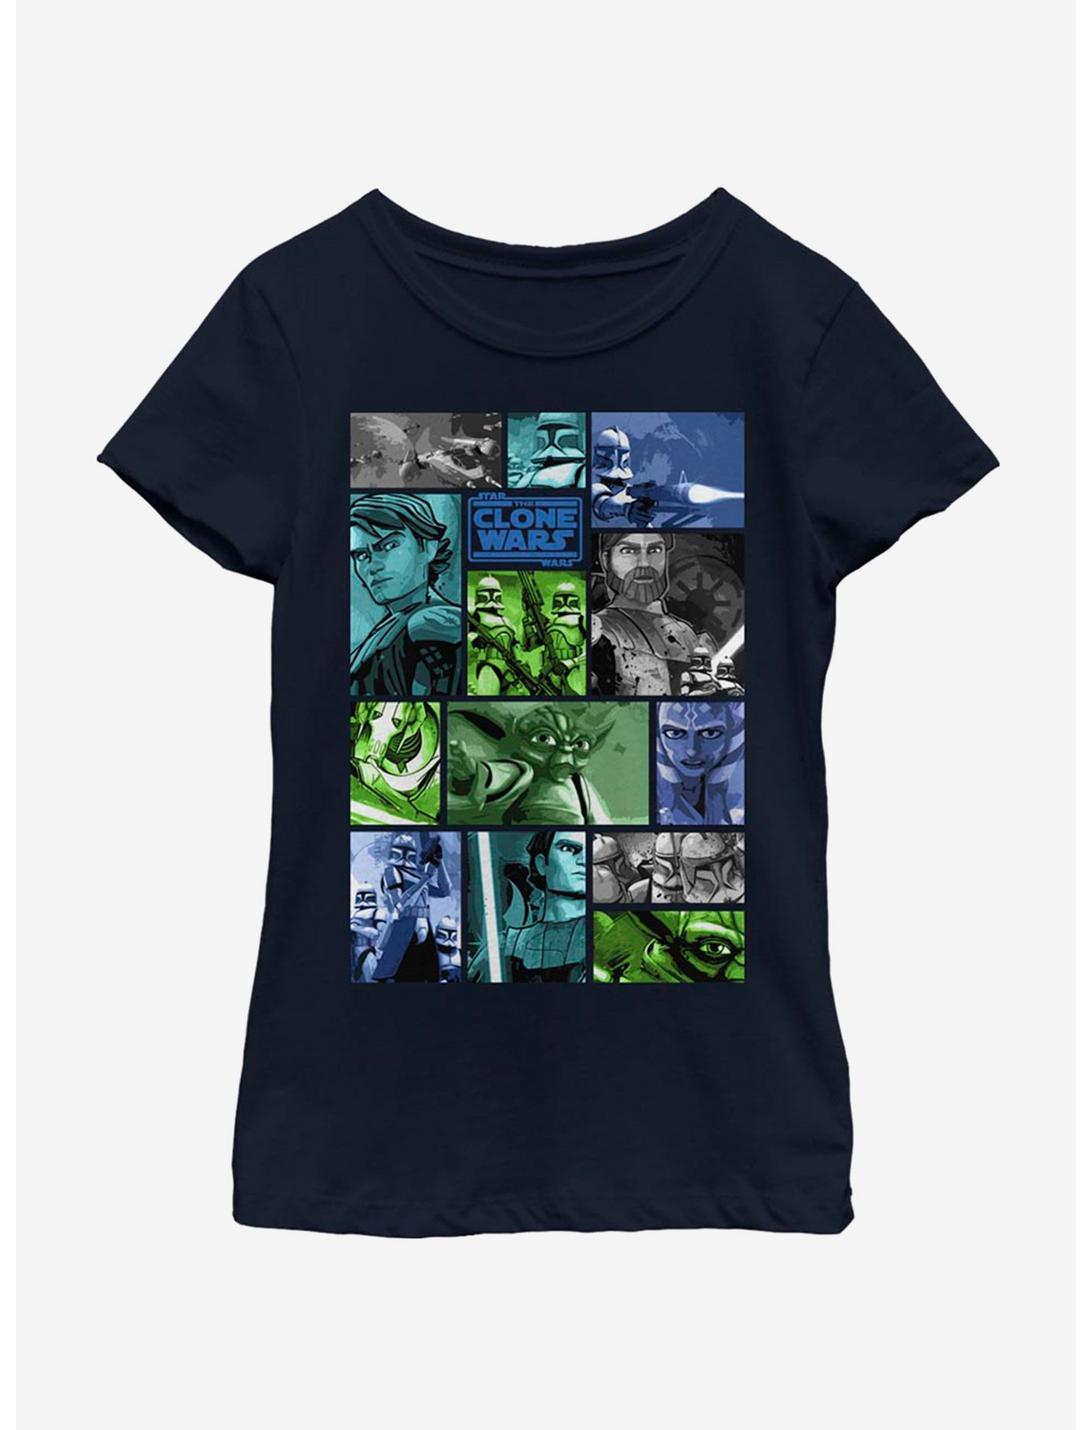 Star Wars: The Clone Wars Story Squares Youth Girls T-Shirt, NAVY, hi-res